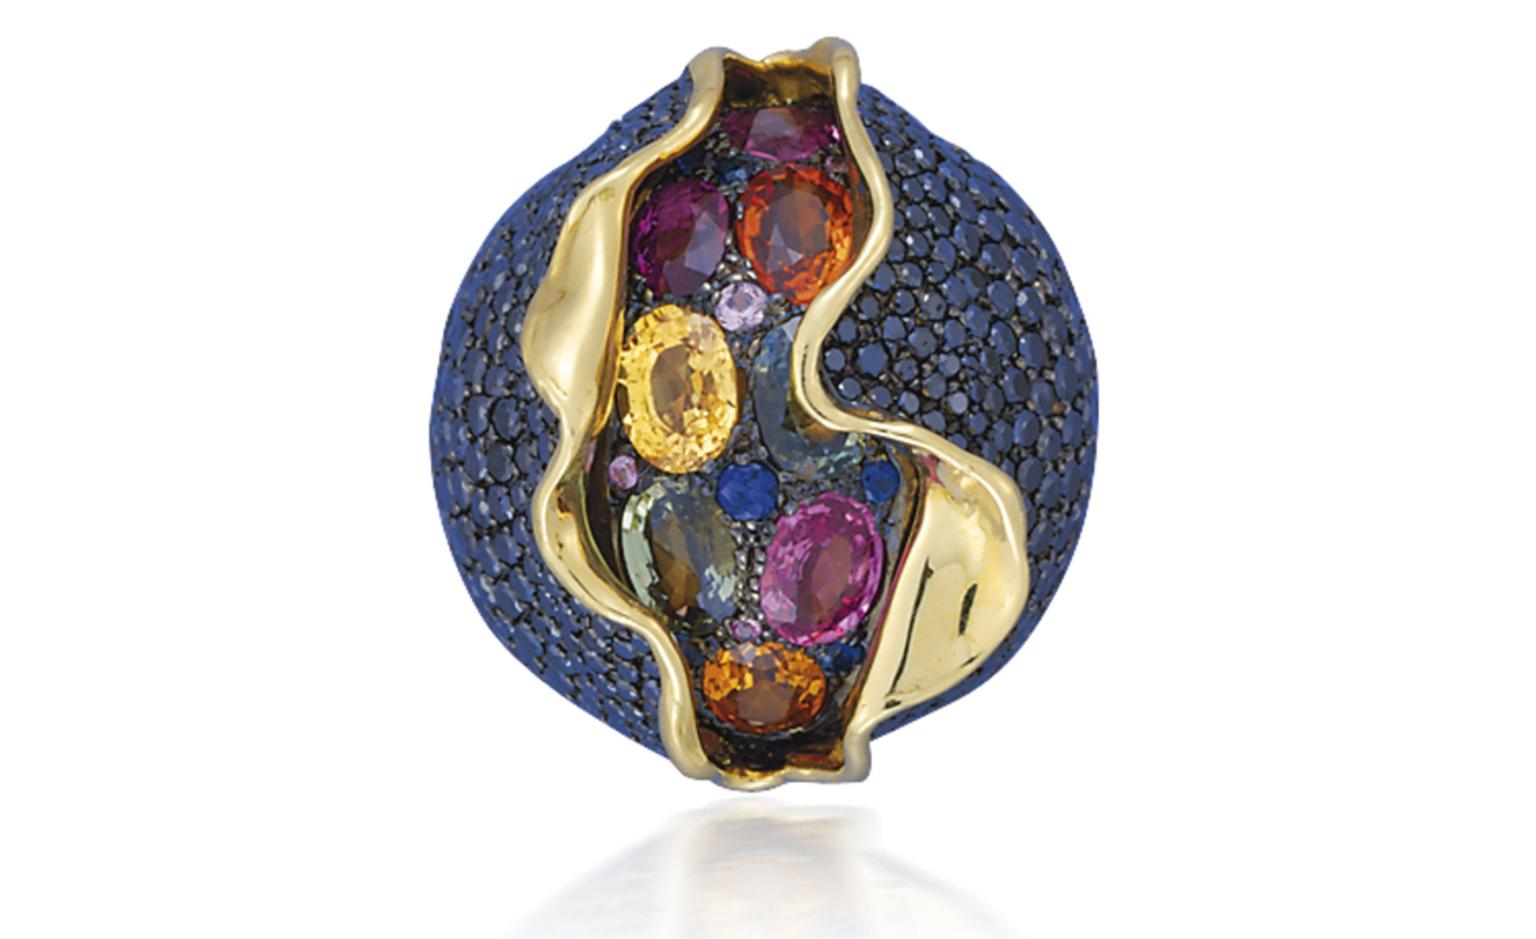 Lot 93 (3). An unusual suite of coloured diamond and coloured sapphire 'Craquele' jewellery, by Andre Marcha. Comprising a hinged bangle, ear clips and a ring. Estimate 50,000 - 60,000 U.S. dollars.